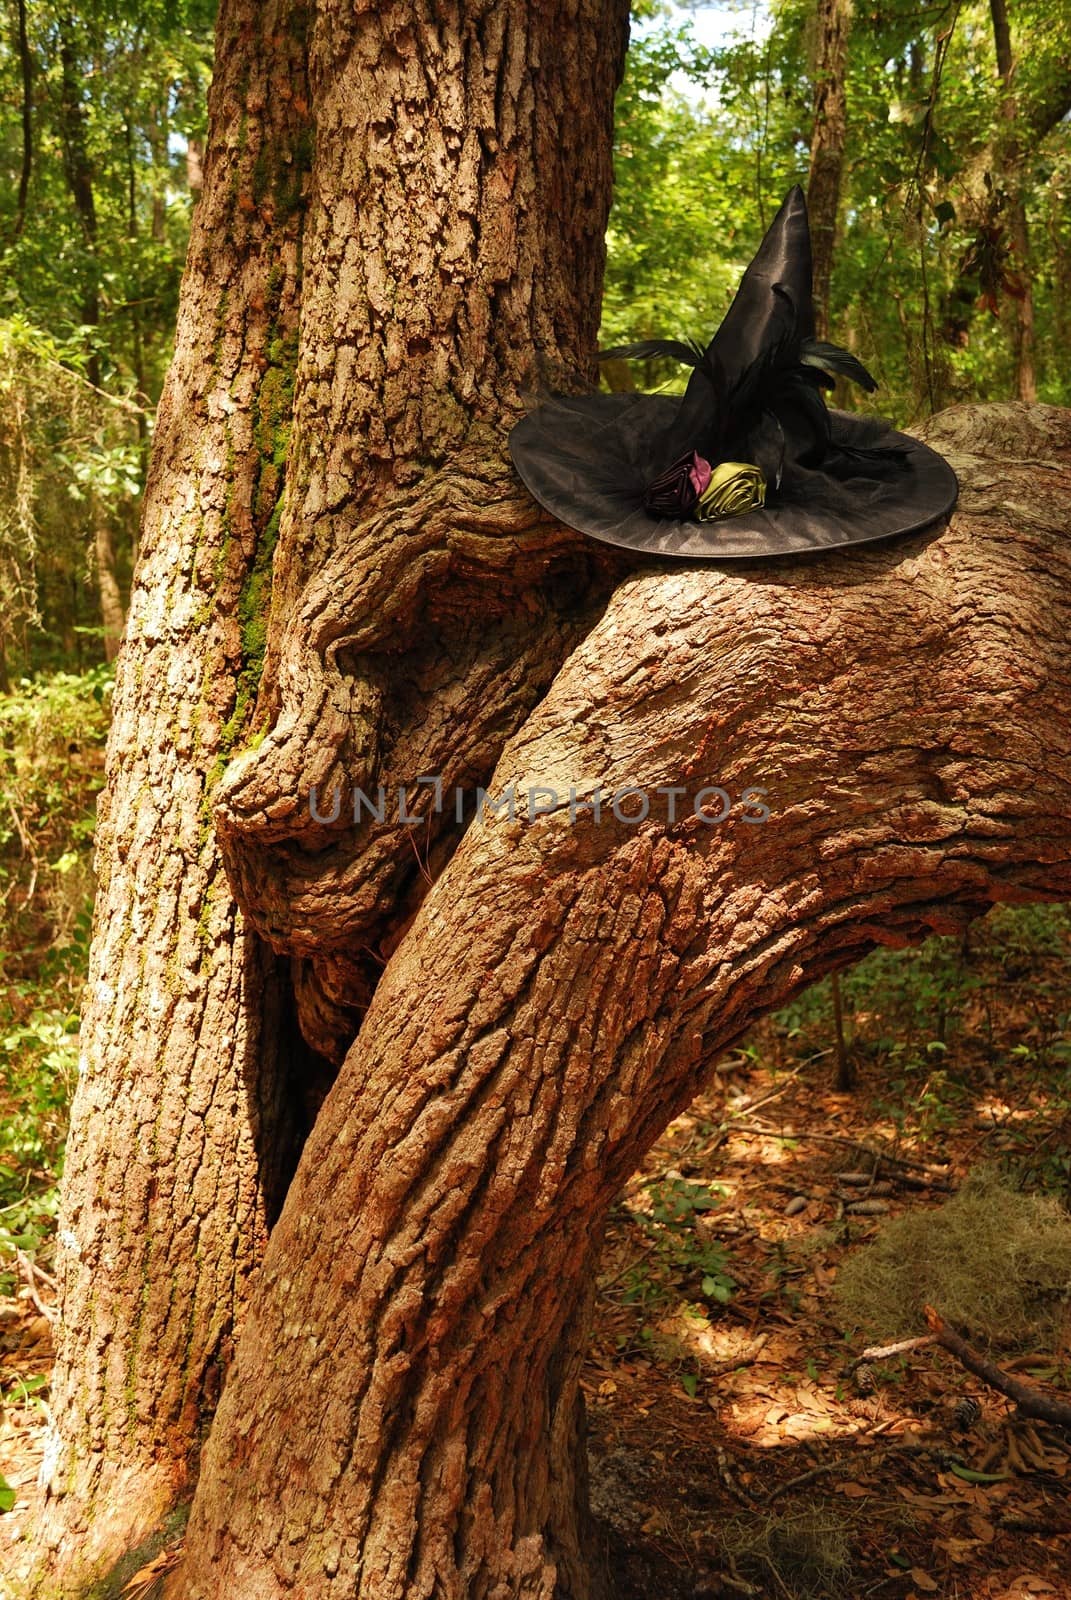 Witch hat in the forest by jackie@debuskphoto.com